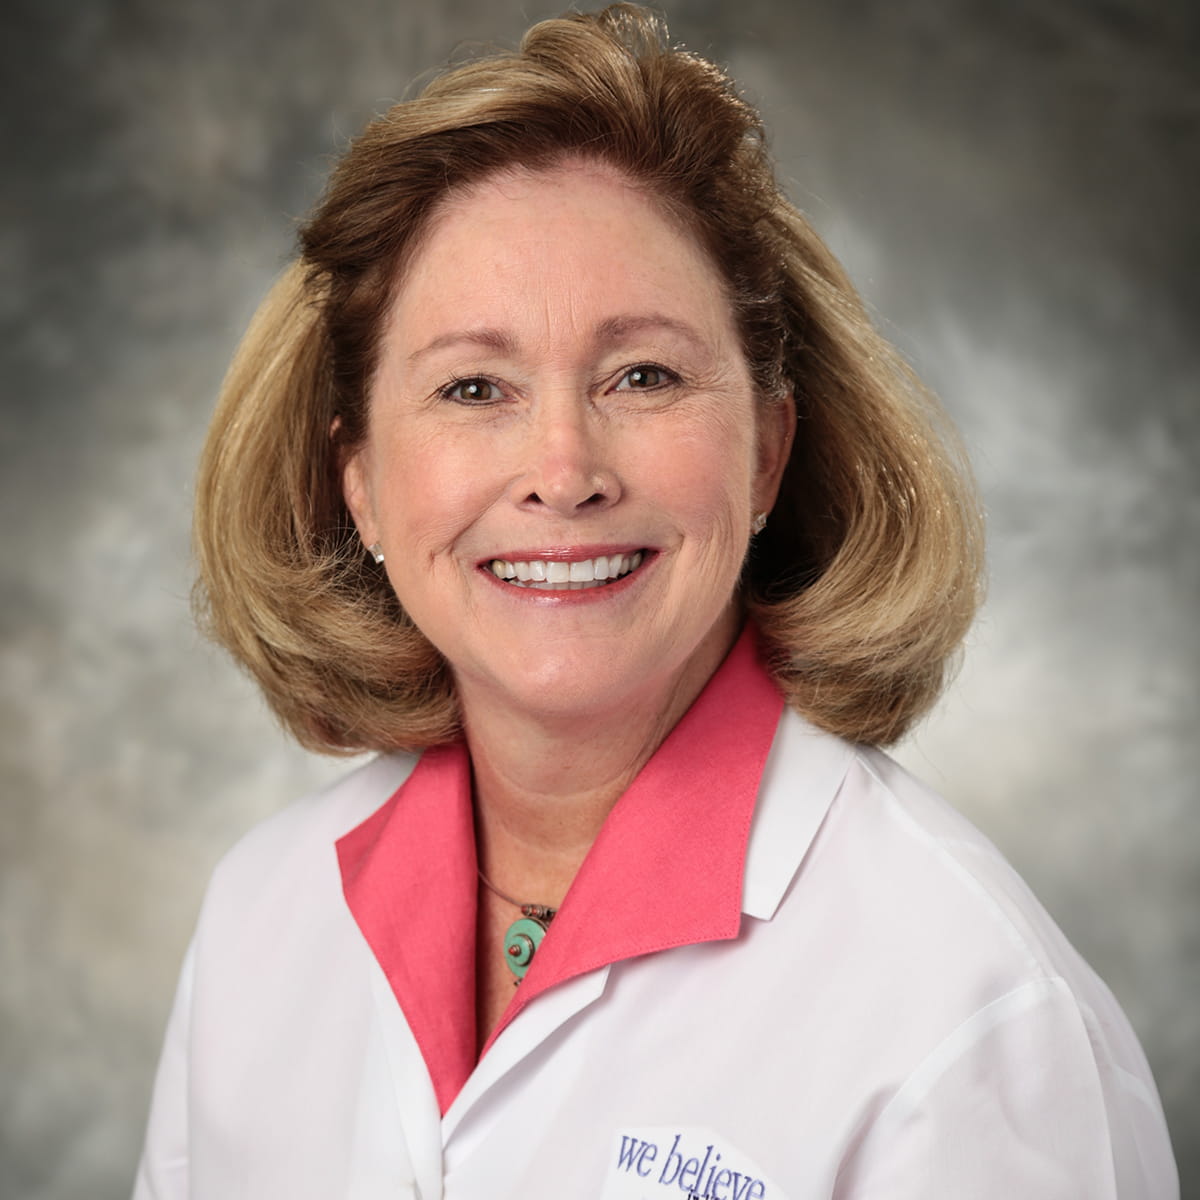 A friendly headshot of Mary Gearhard, MD